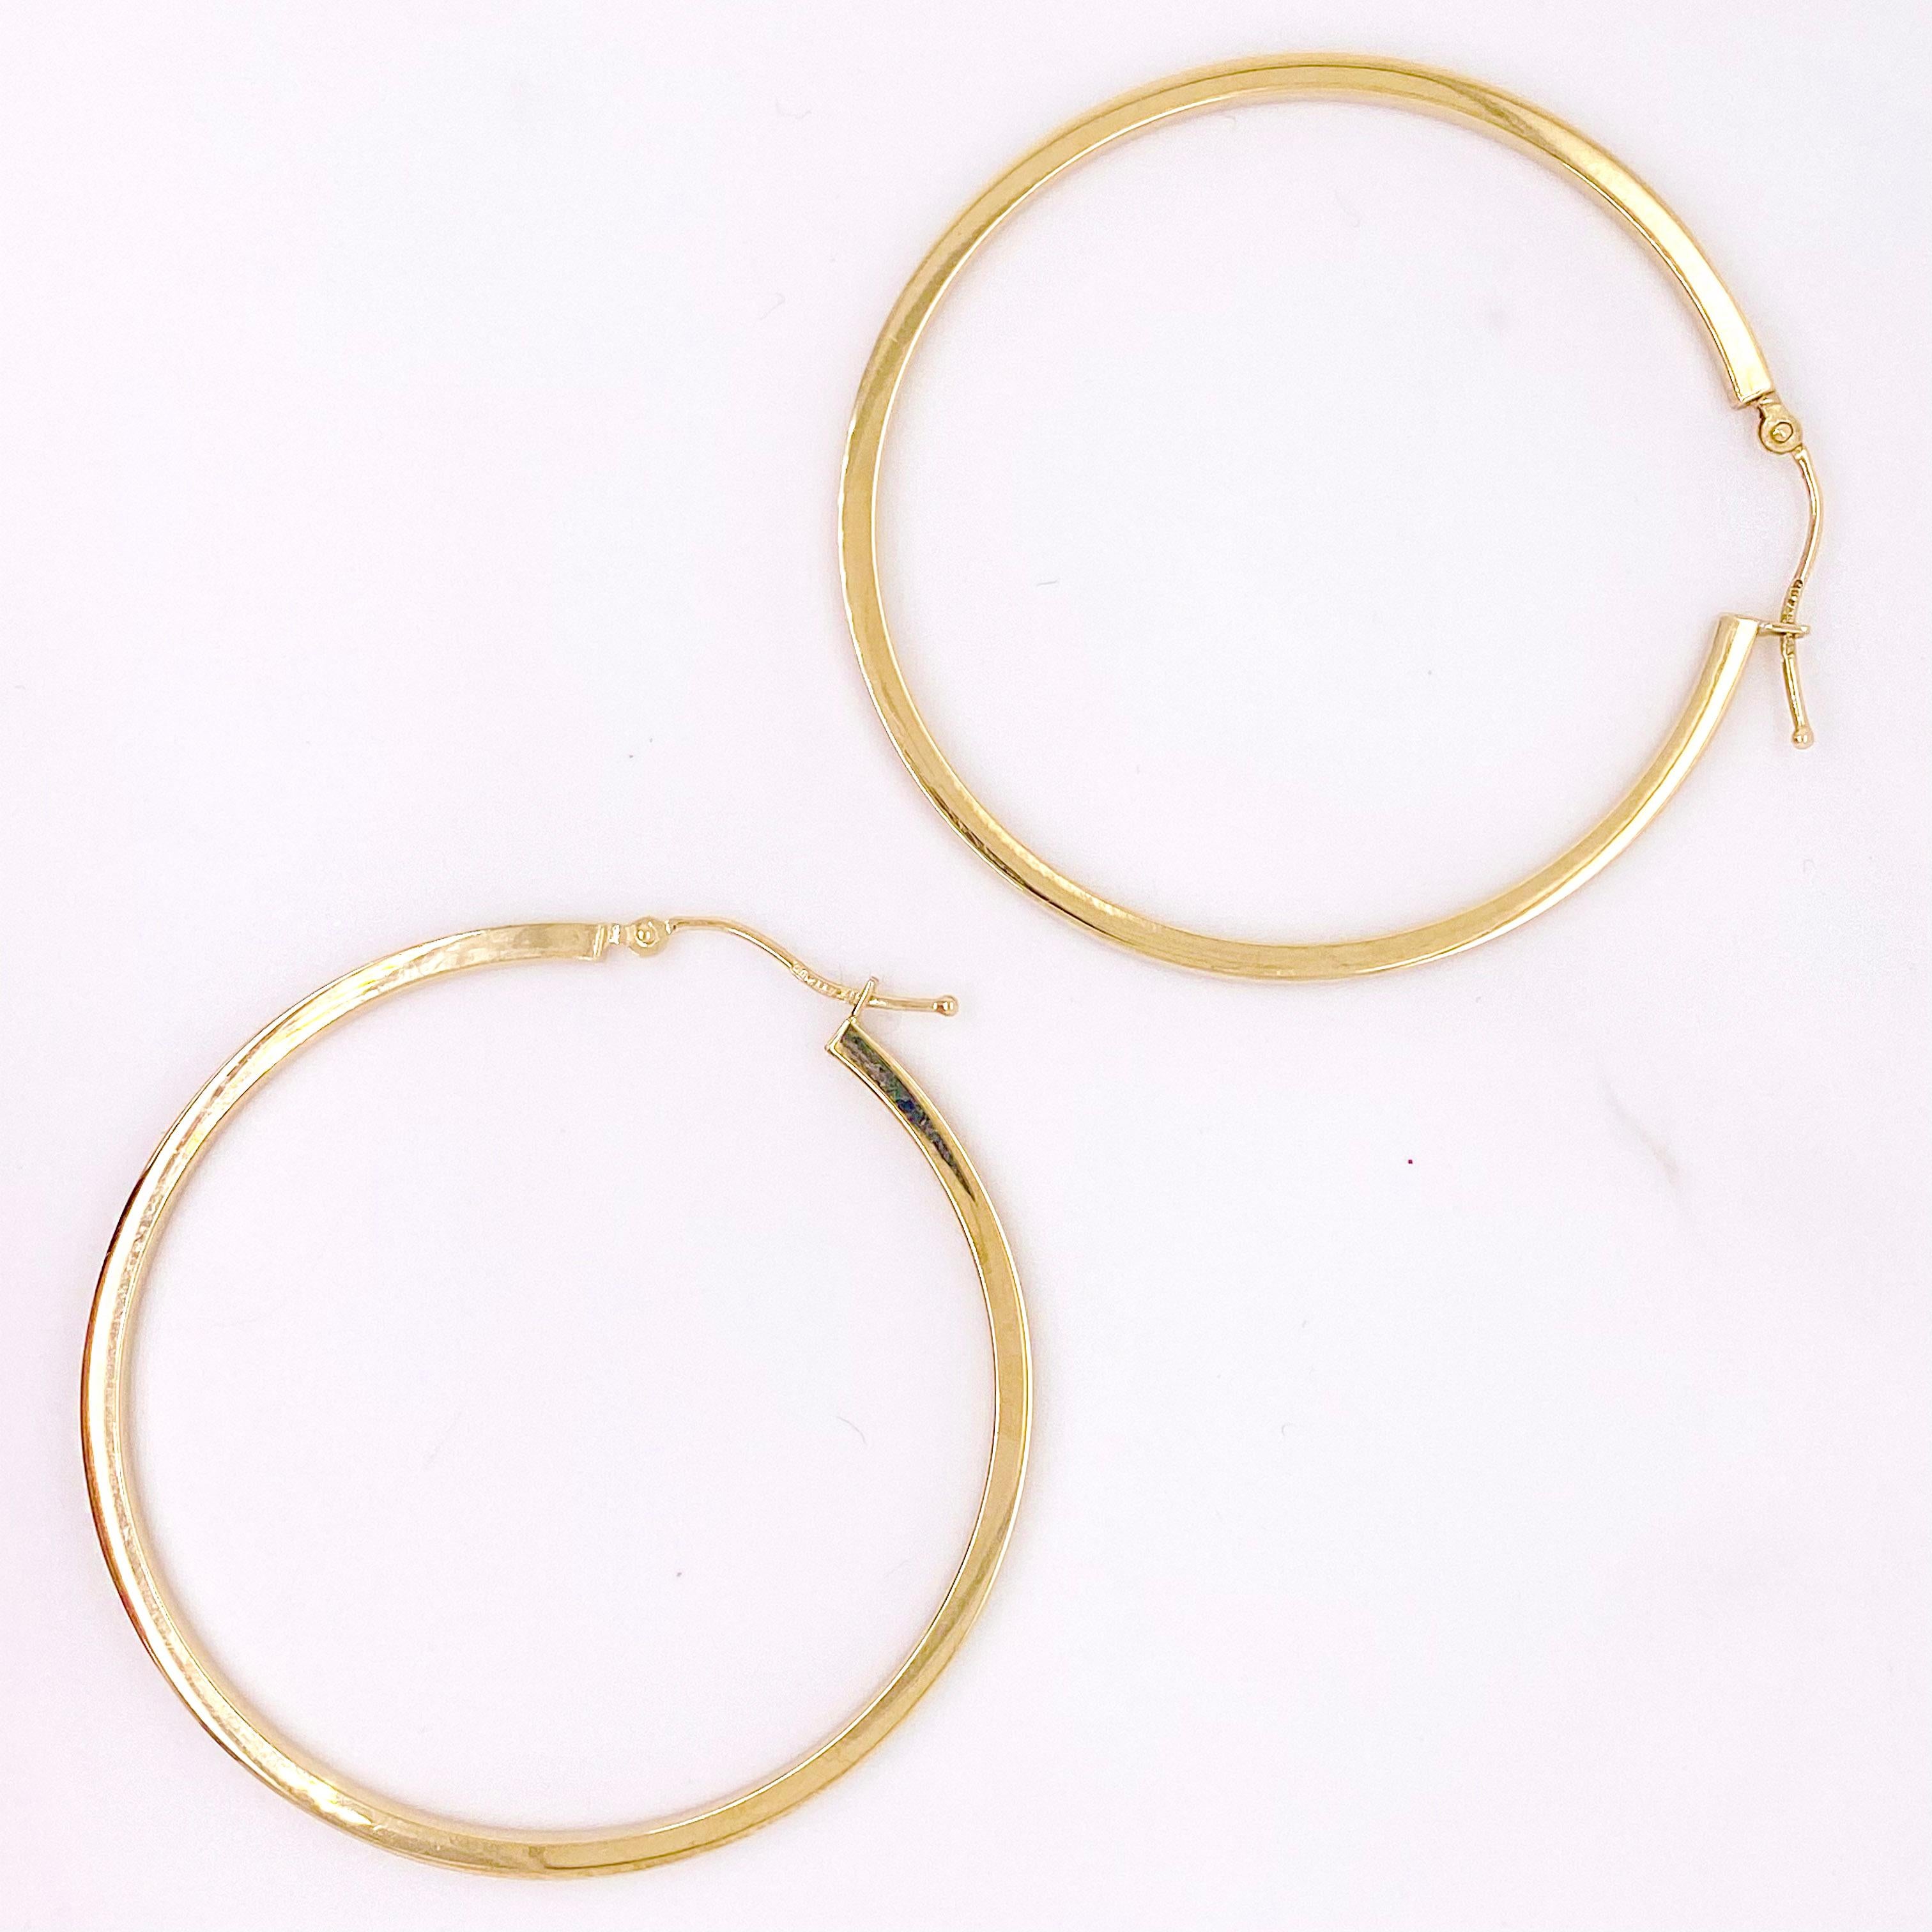 Gold hoop earrings are a staple in fine jewelry! These classic earrings are timeless and upgrade any outfit! The 14 karat yellow gold hoops are lightweight and comfortable to wear with a modern, flat edge design. They have a high polish finish and